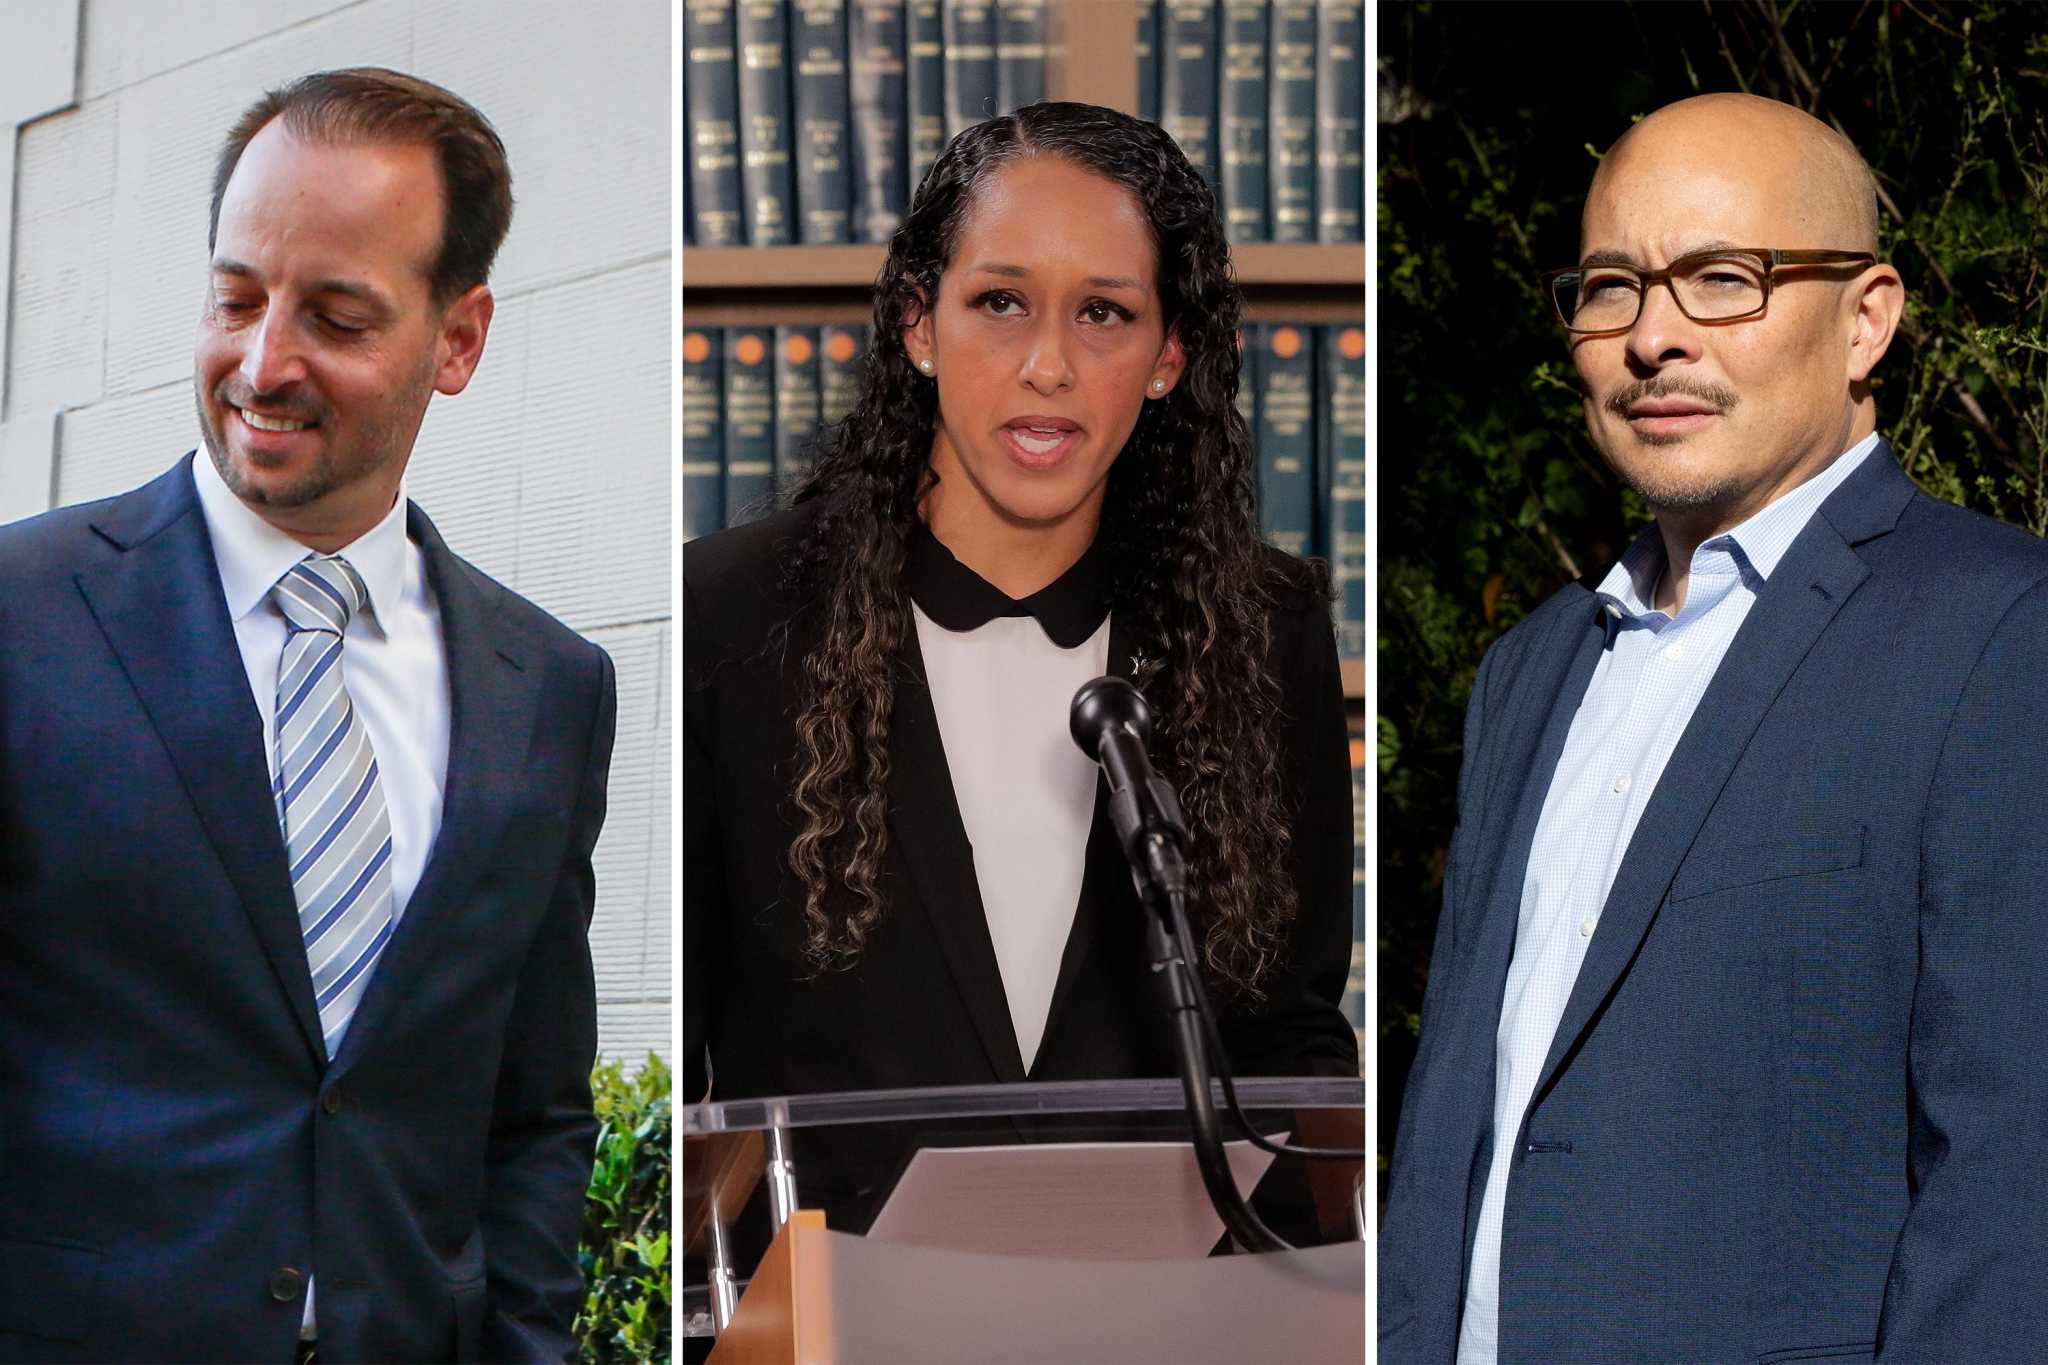 We asked the leading candidates for S.F.